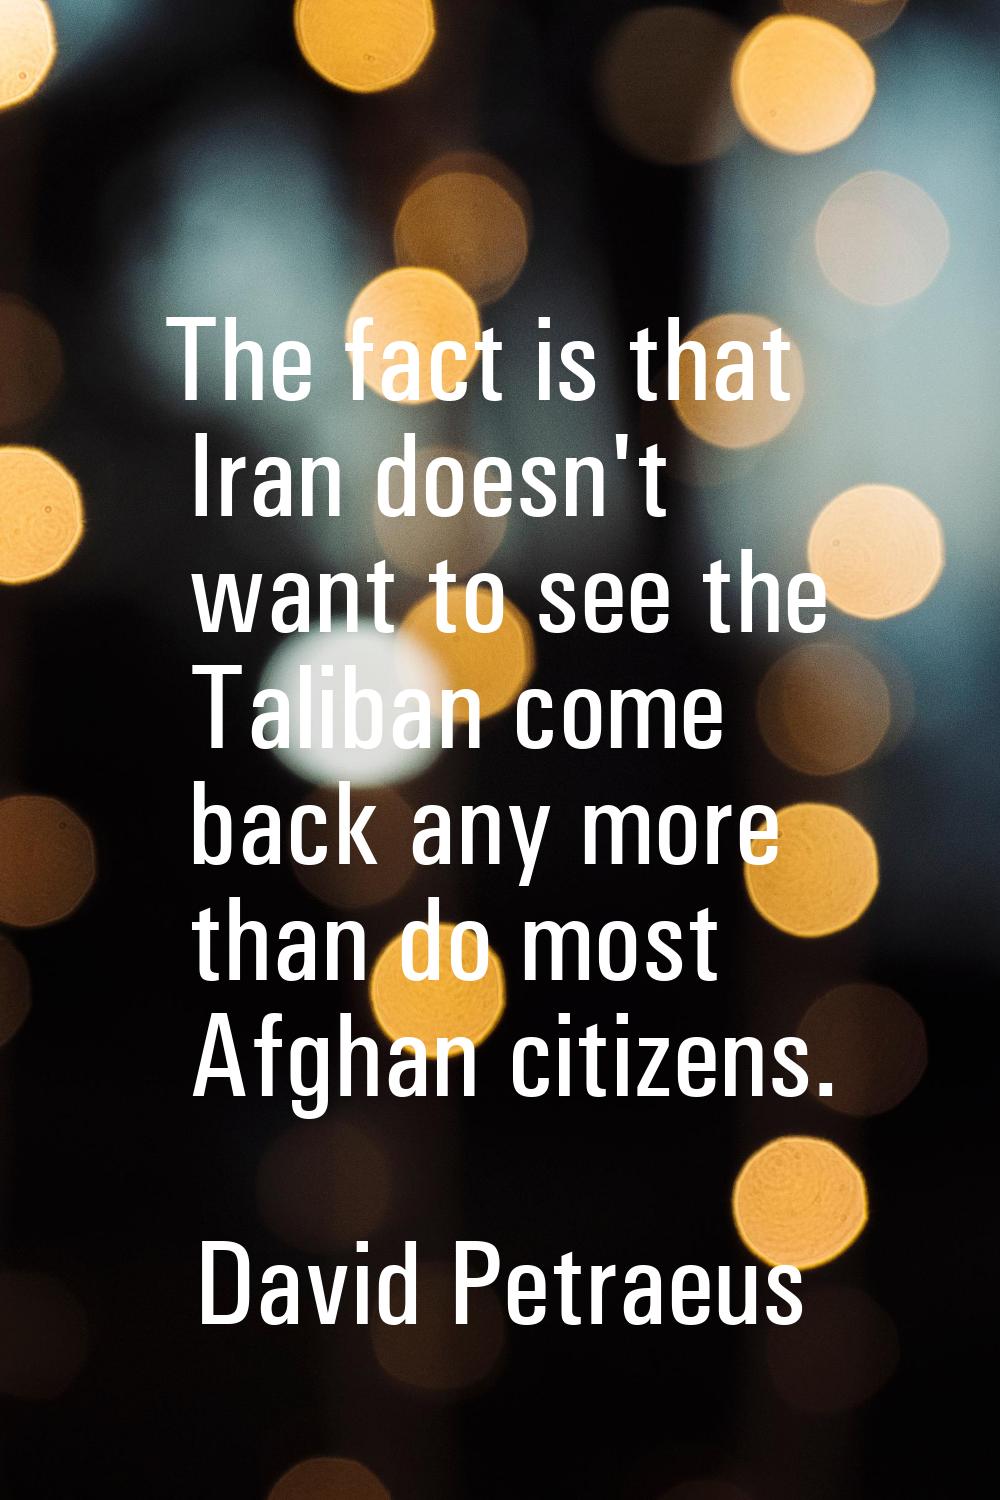 The fact is that Iran doesn't want to see the Taliban come back any more than do most Afghan citize